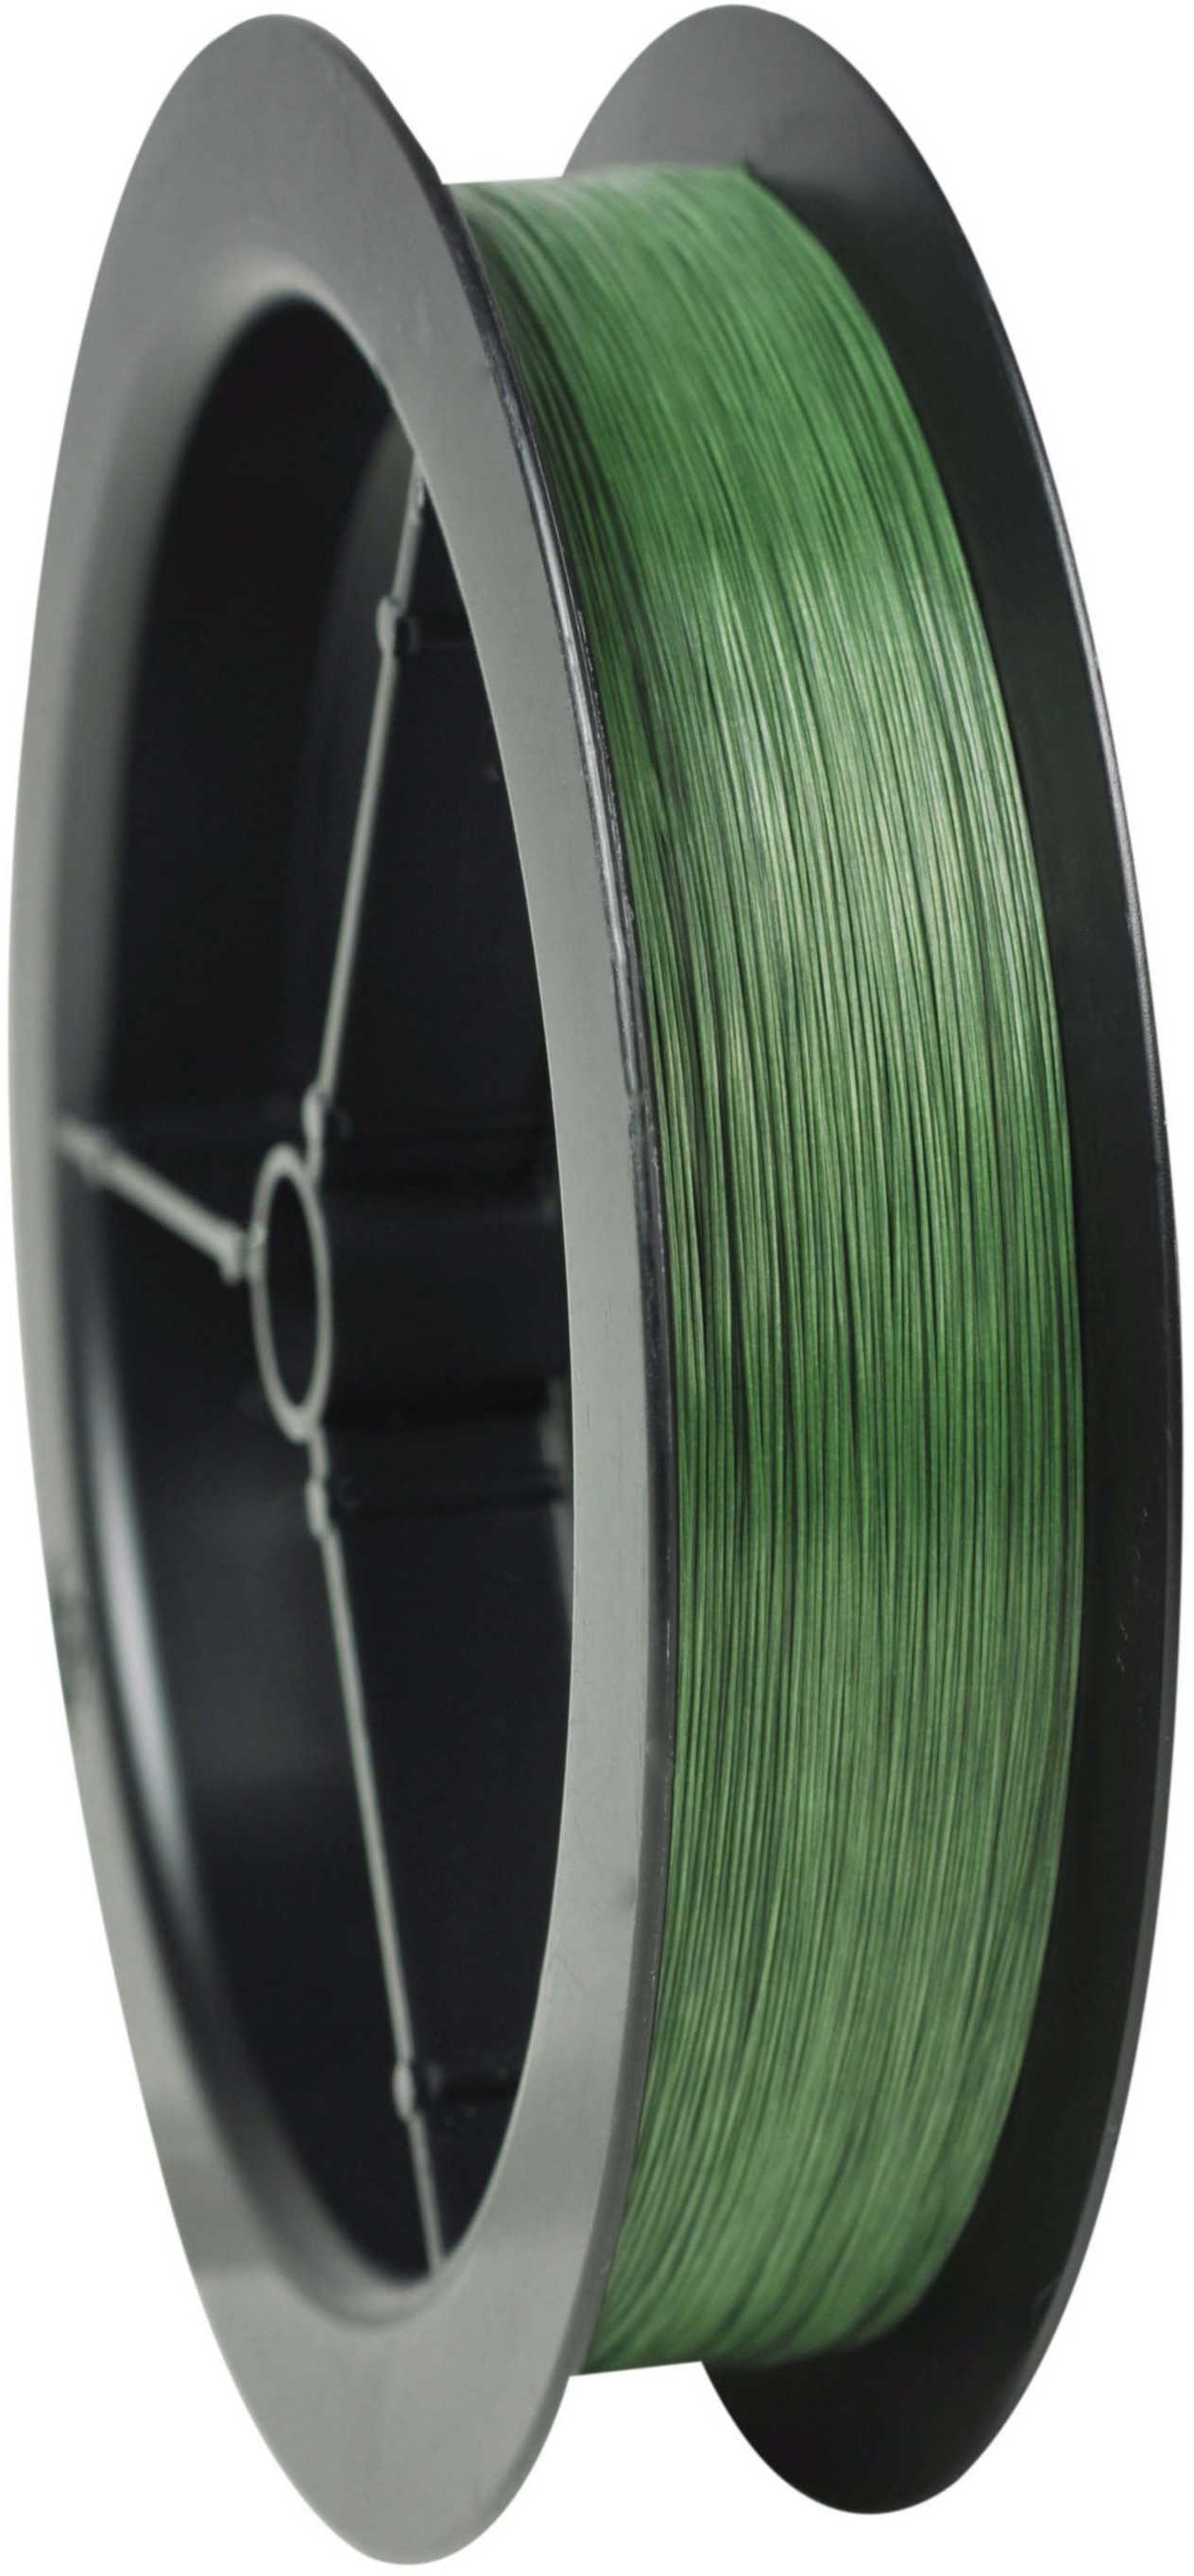 Spiderwire EZ Braided Line, Moss Green 20 lb Filler Spool, 300 Yards 1140573